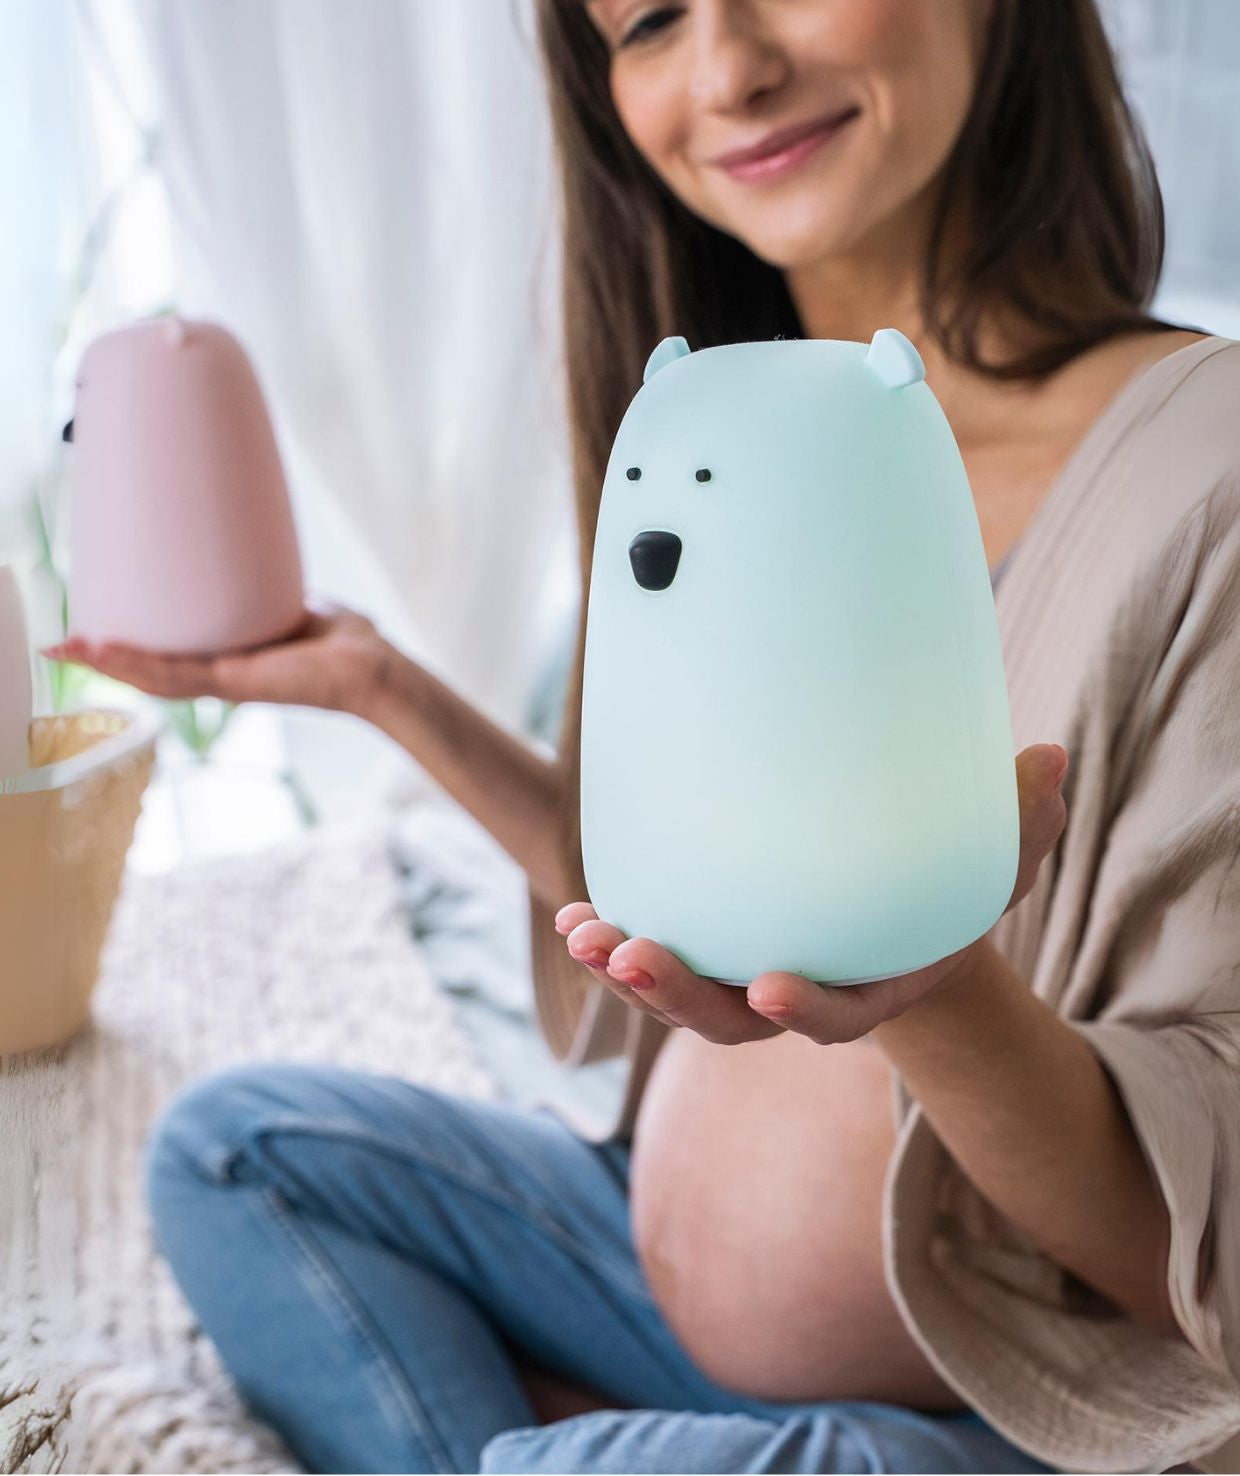 A woman holding a white silicone lamp in the shape of a teddy bear with charming features like small ears and a round belly. Ideal for bedtime routines and providing a sense of security for children.